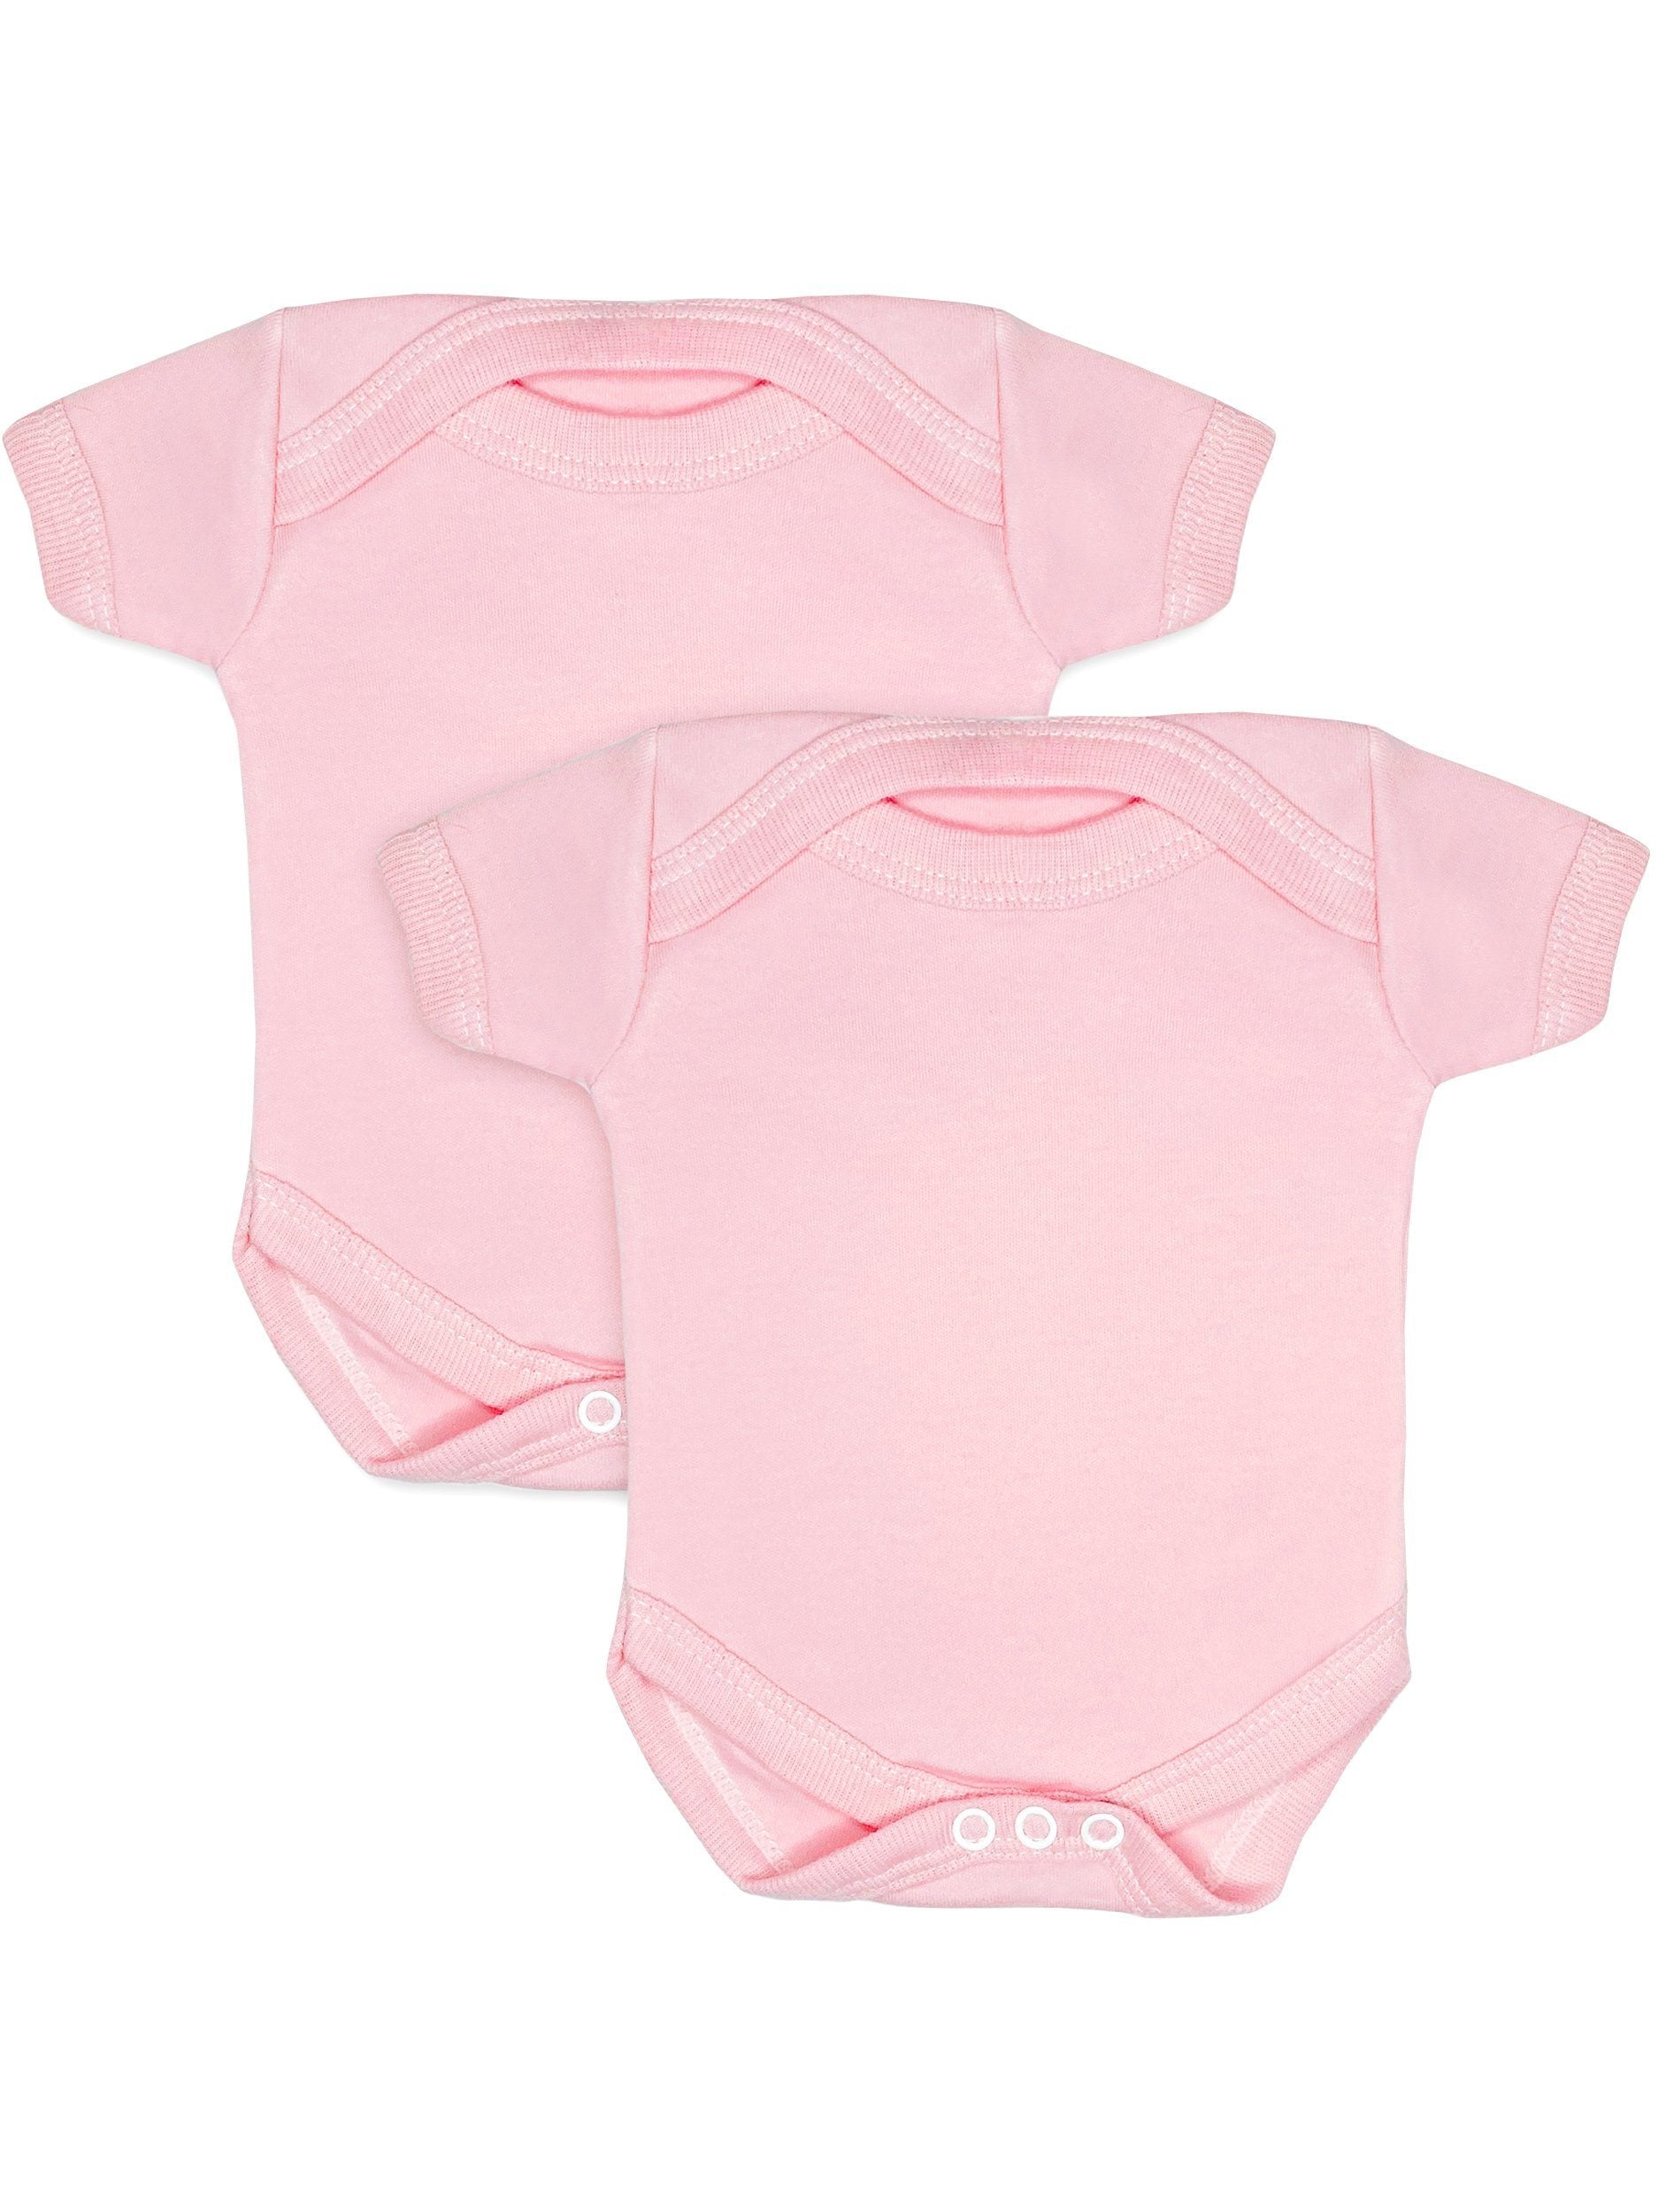 2 Pack - 100% Cotton Pink Short Sleeved Bodysuits (Early Baby, 3-5lb) - Bodysuit / Vest - Little Mouse Baby Clothing & Gifts